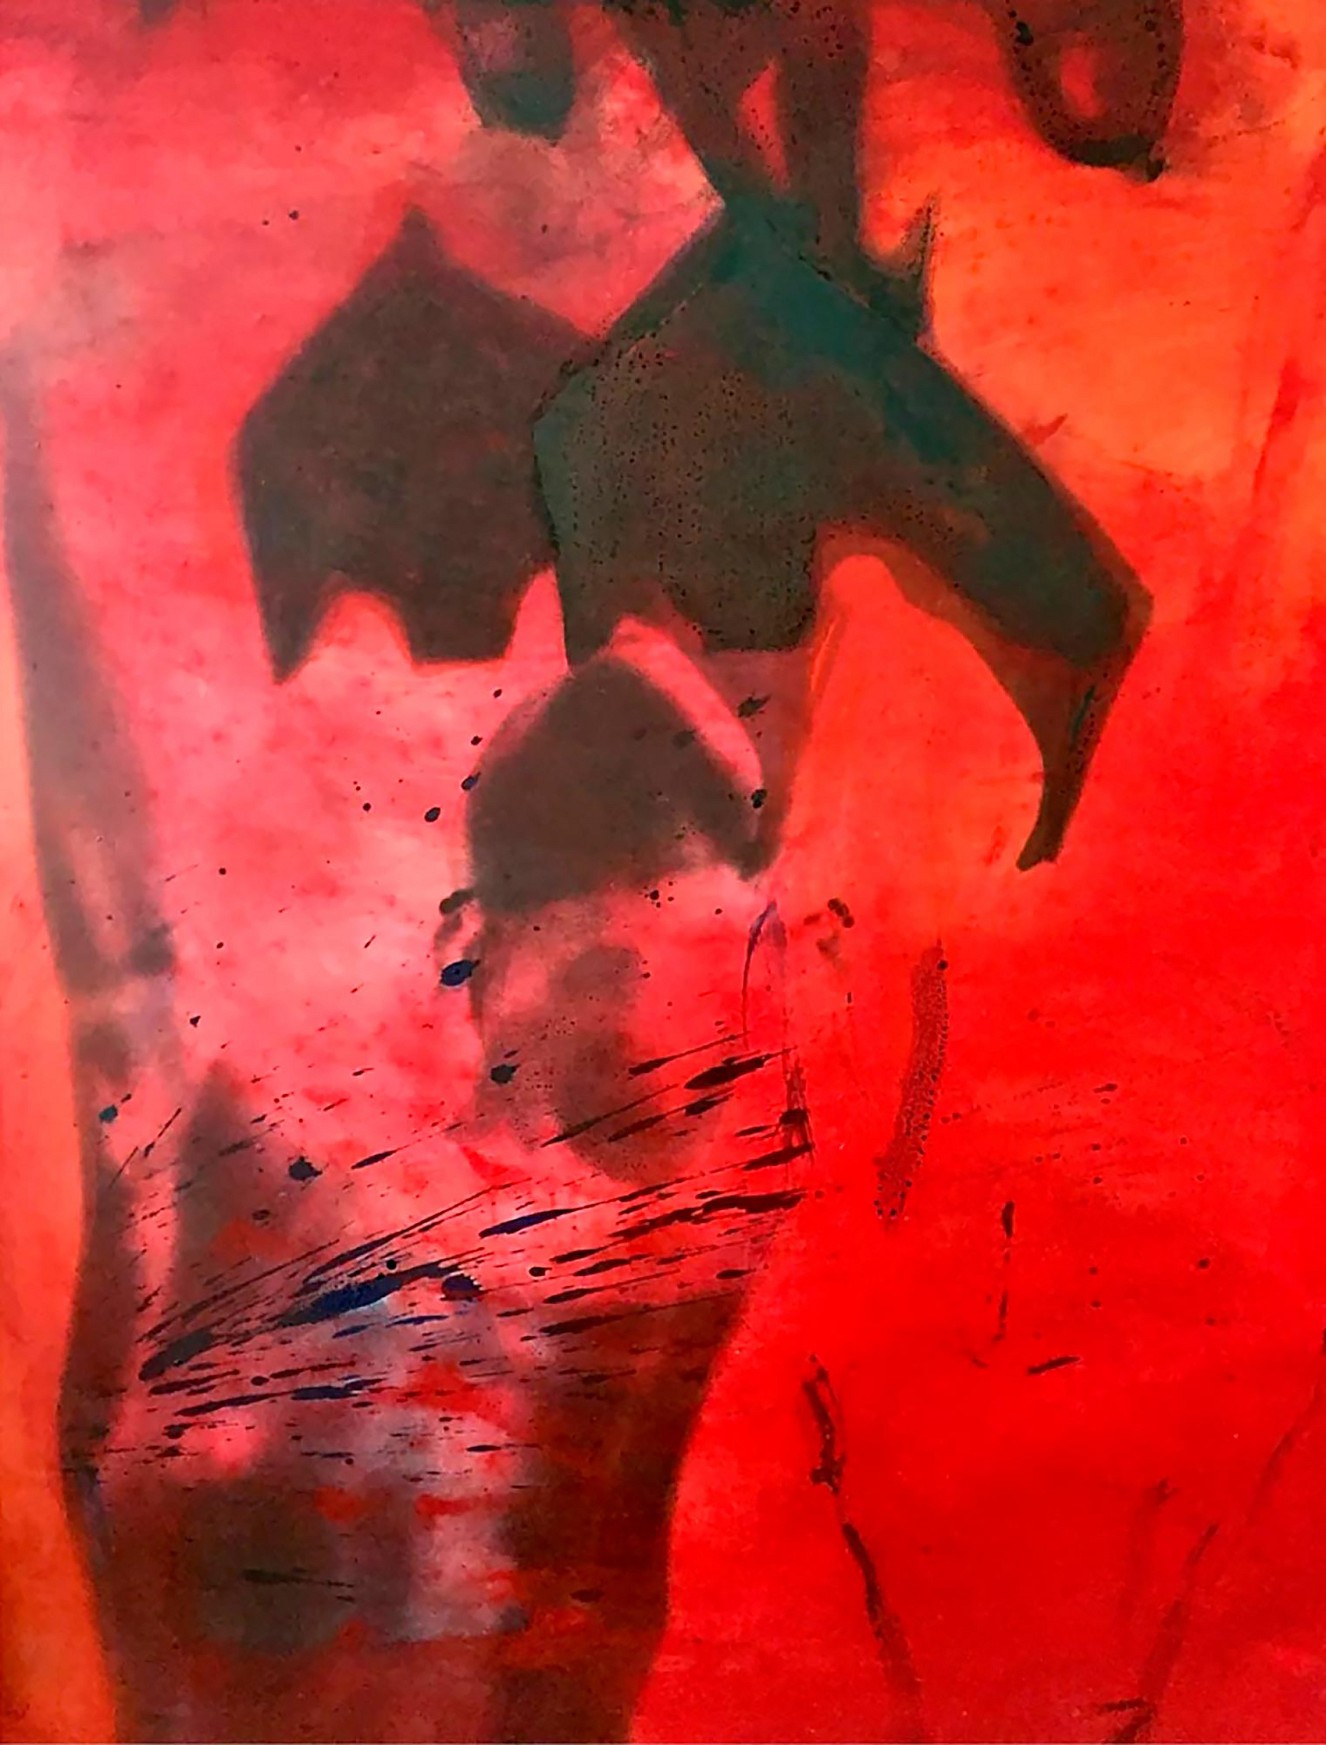 Red Nude,
Tempera on Photo canvas,
92x72 cm, 2022